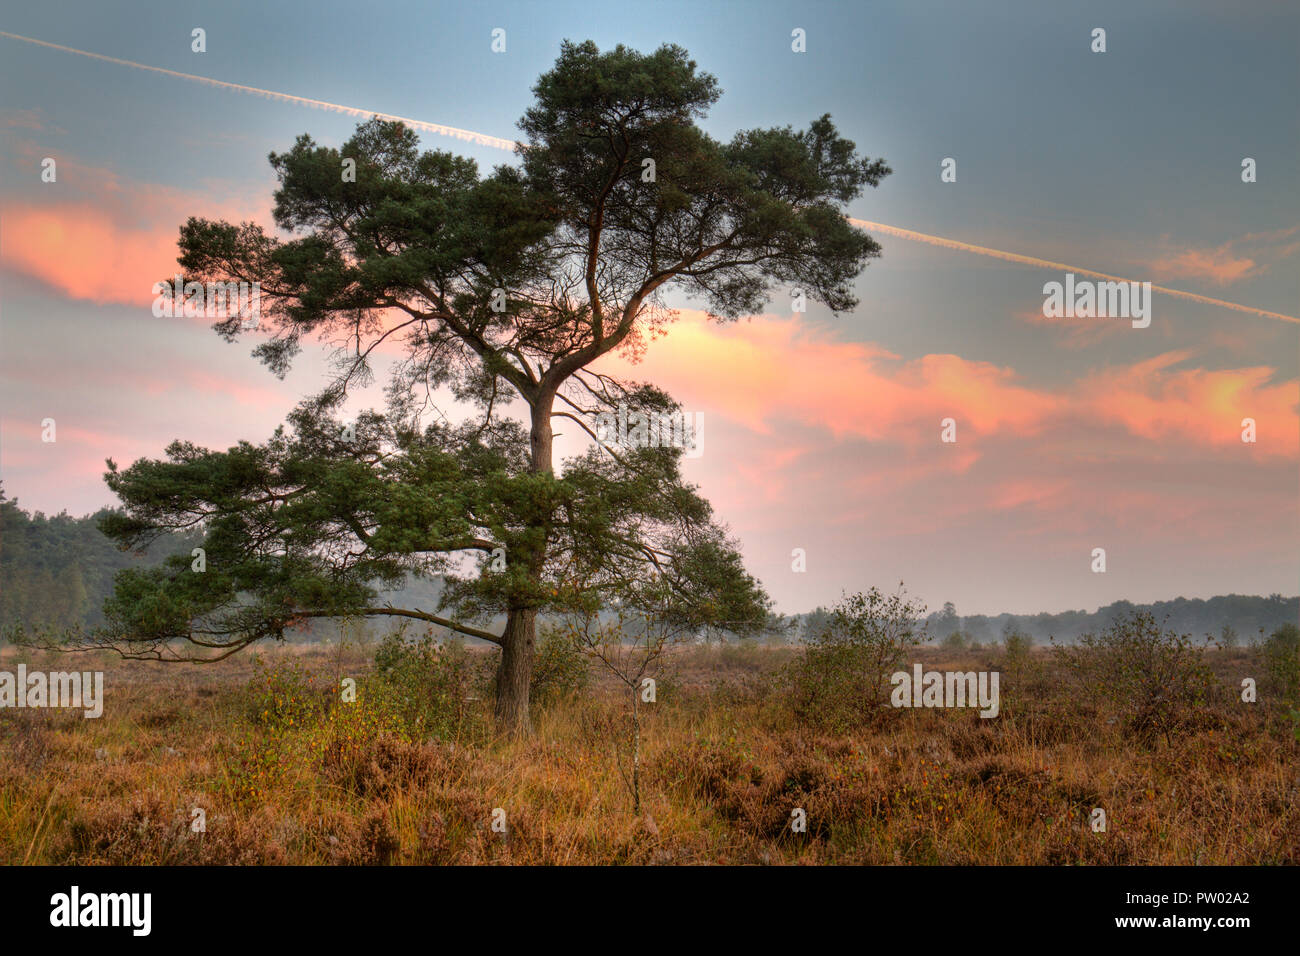 Scots pine on a heath in early morning, orange colored clouds and contrail in the sky Stock Photo